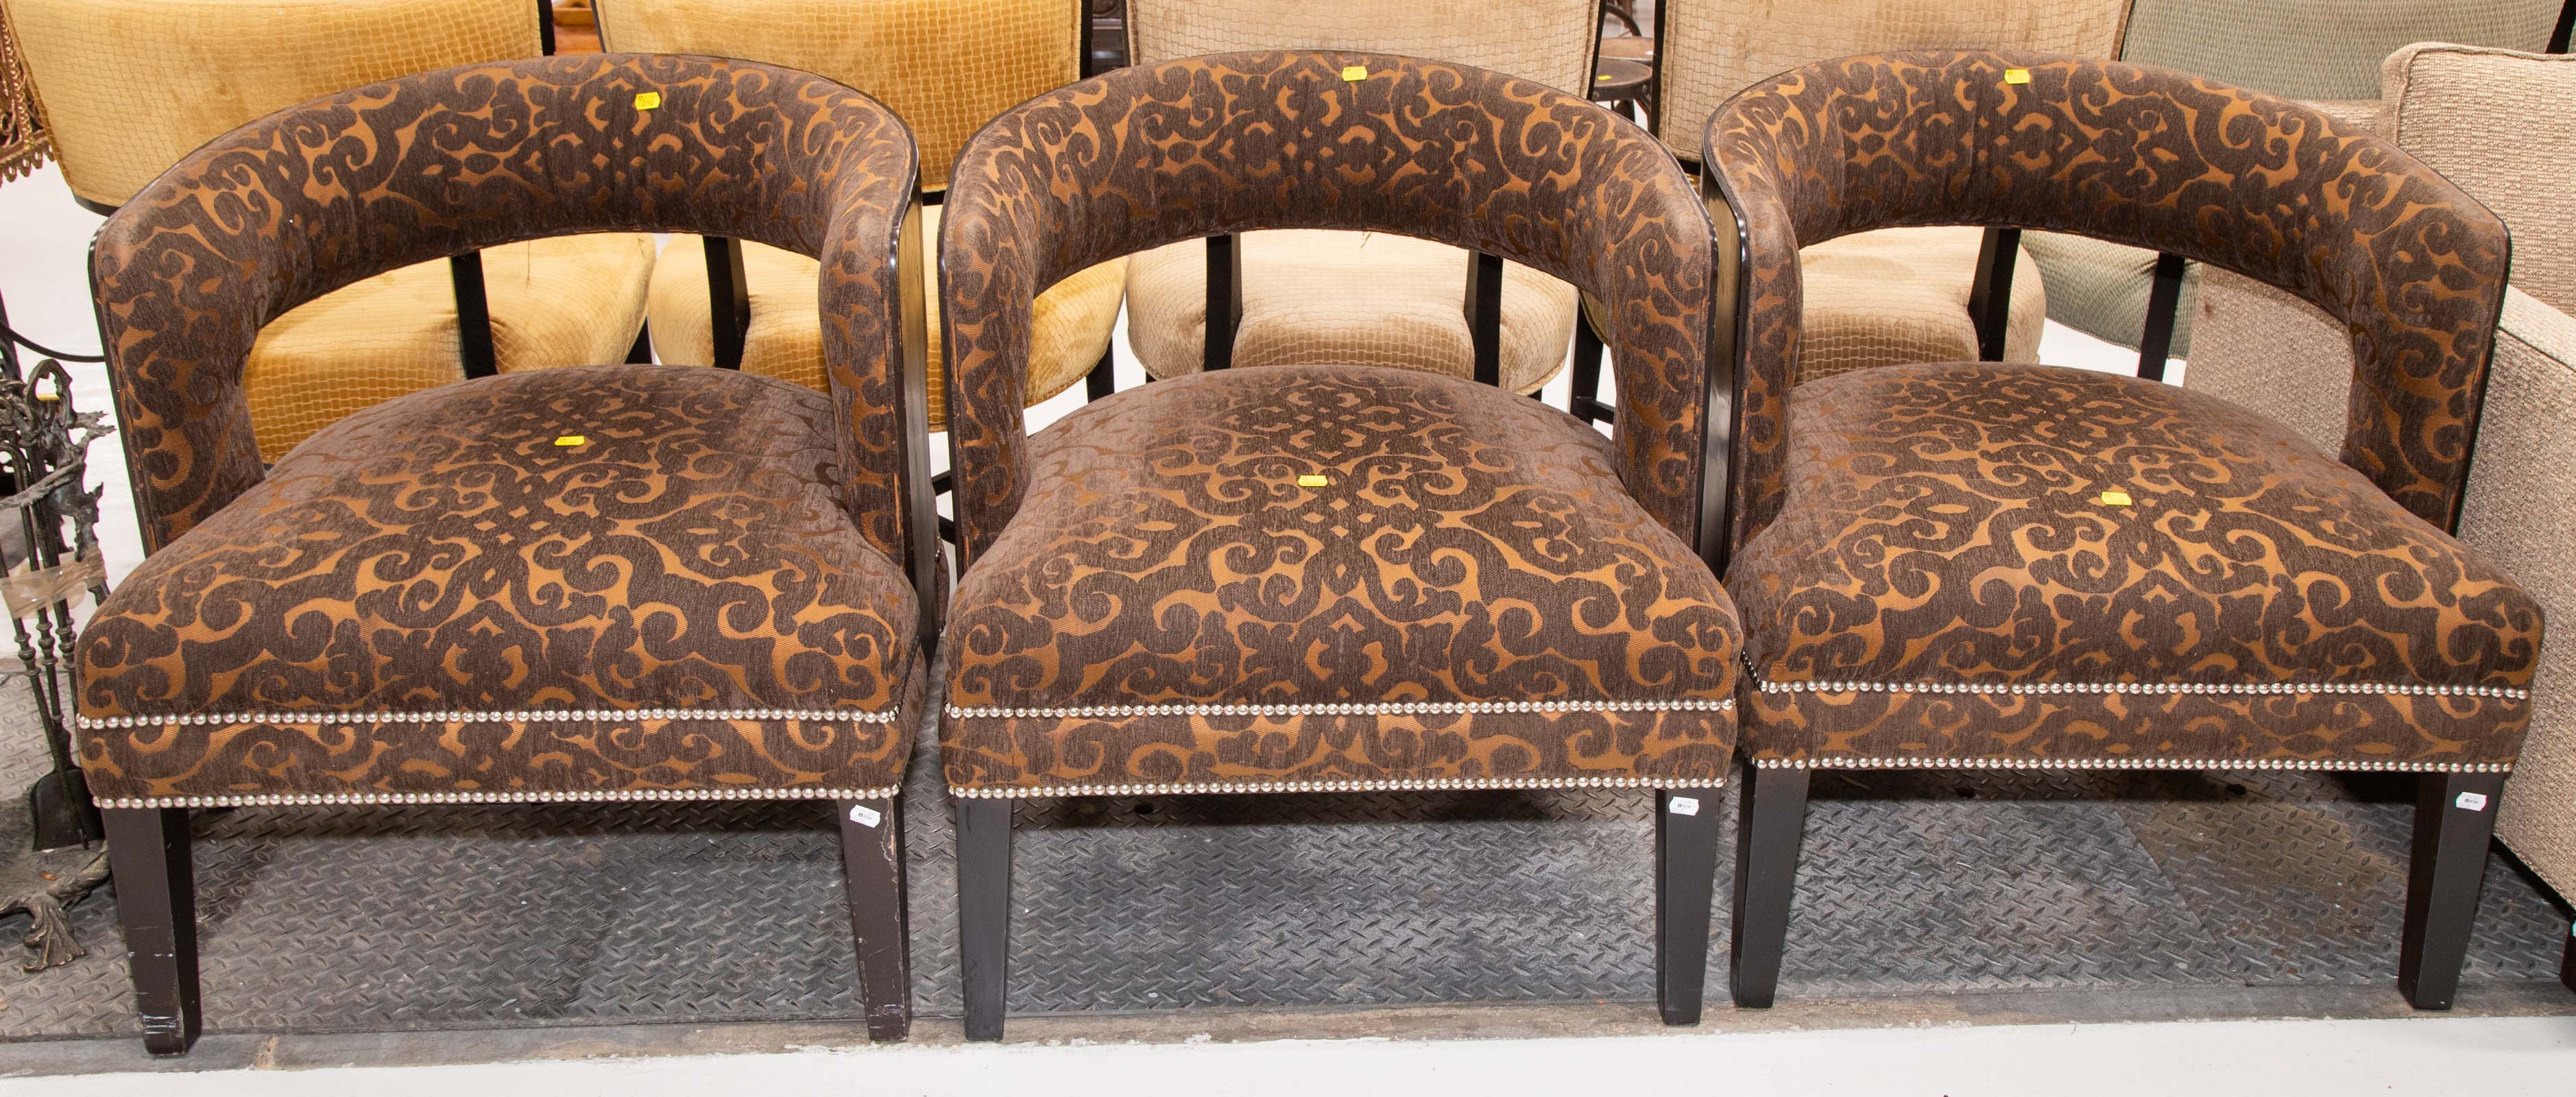 THREE CONTEMPORARY CLASSICAL CHAIRS 31046c